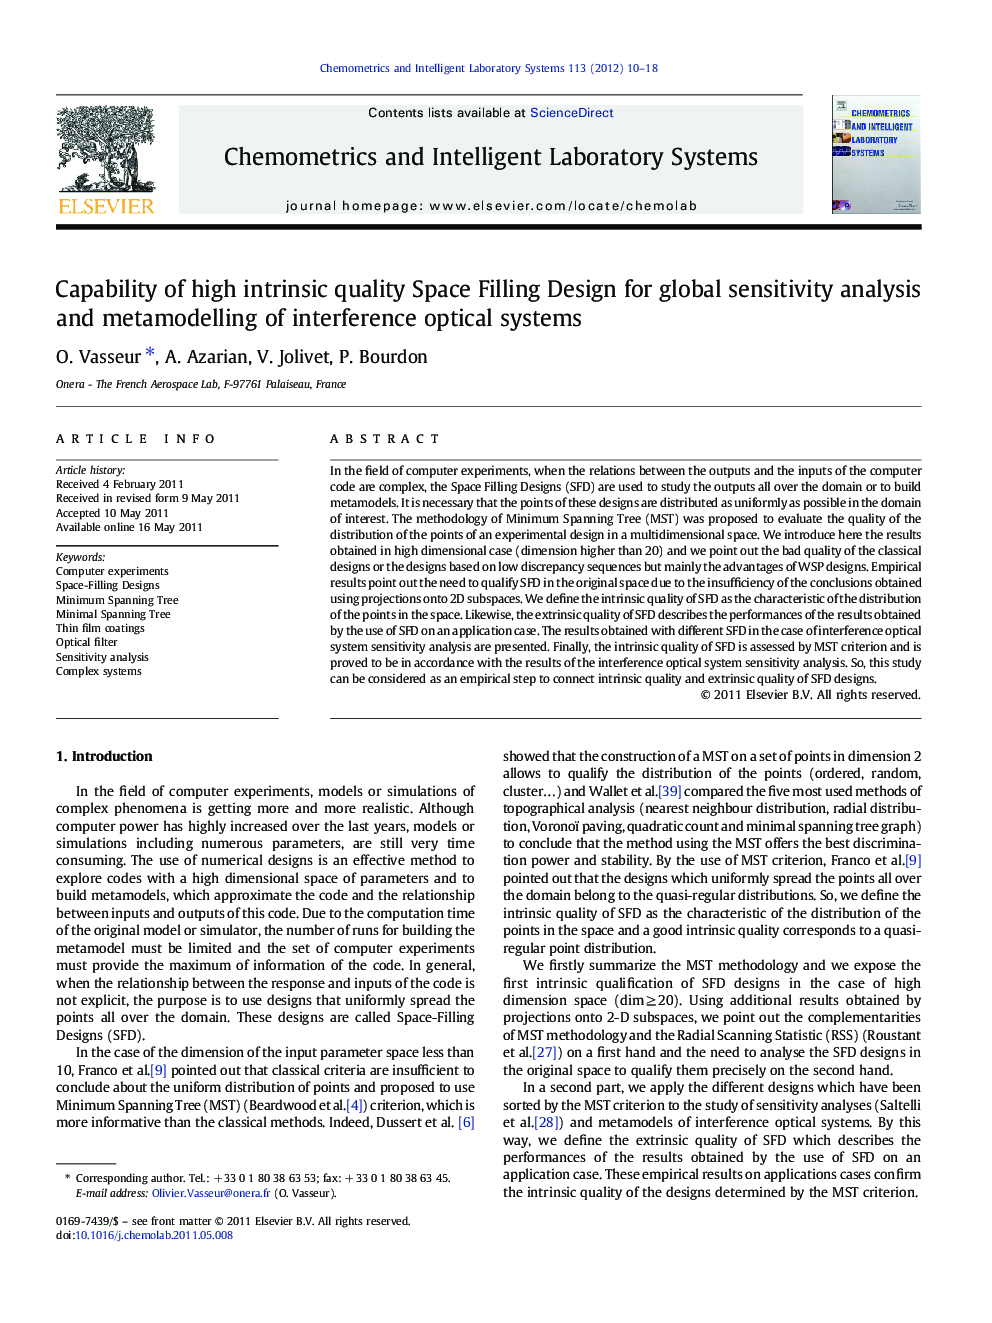 Capability of high intrinsic quality Space Filling Design for global sensitivity analysis and metamodelling of interference optical systems